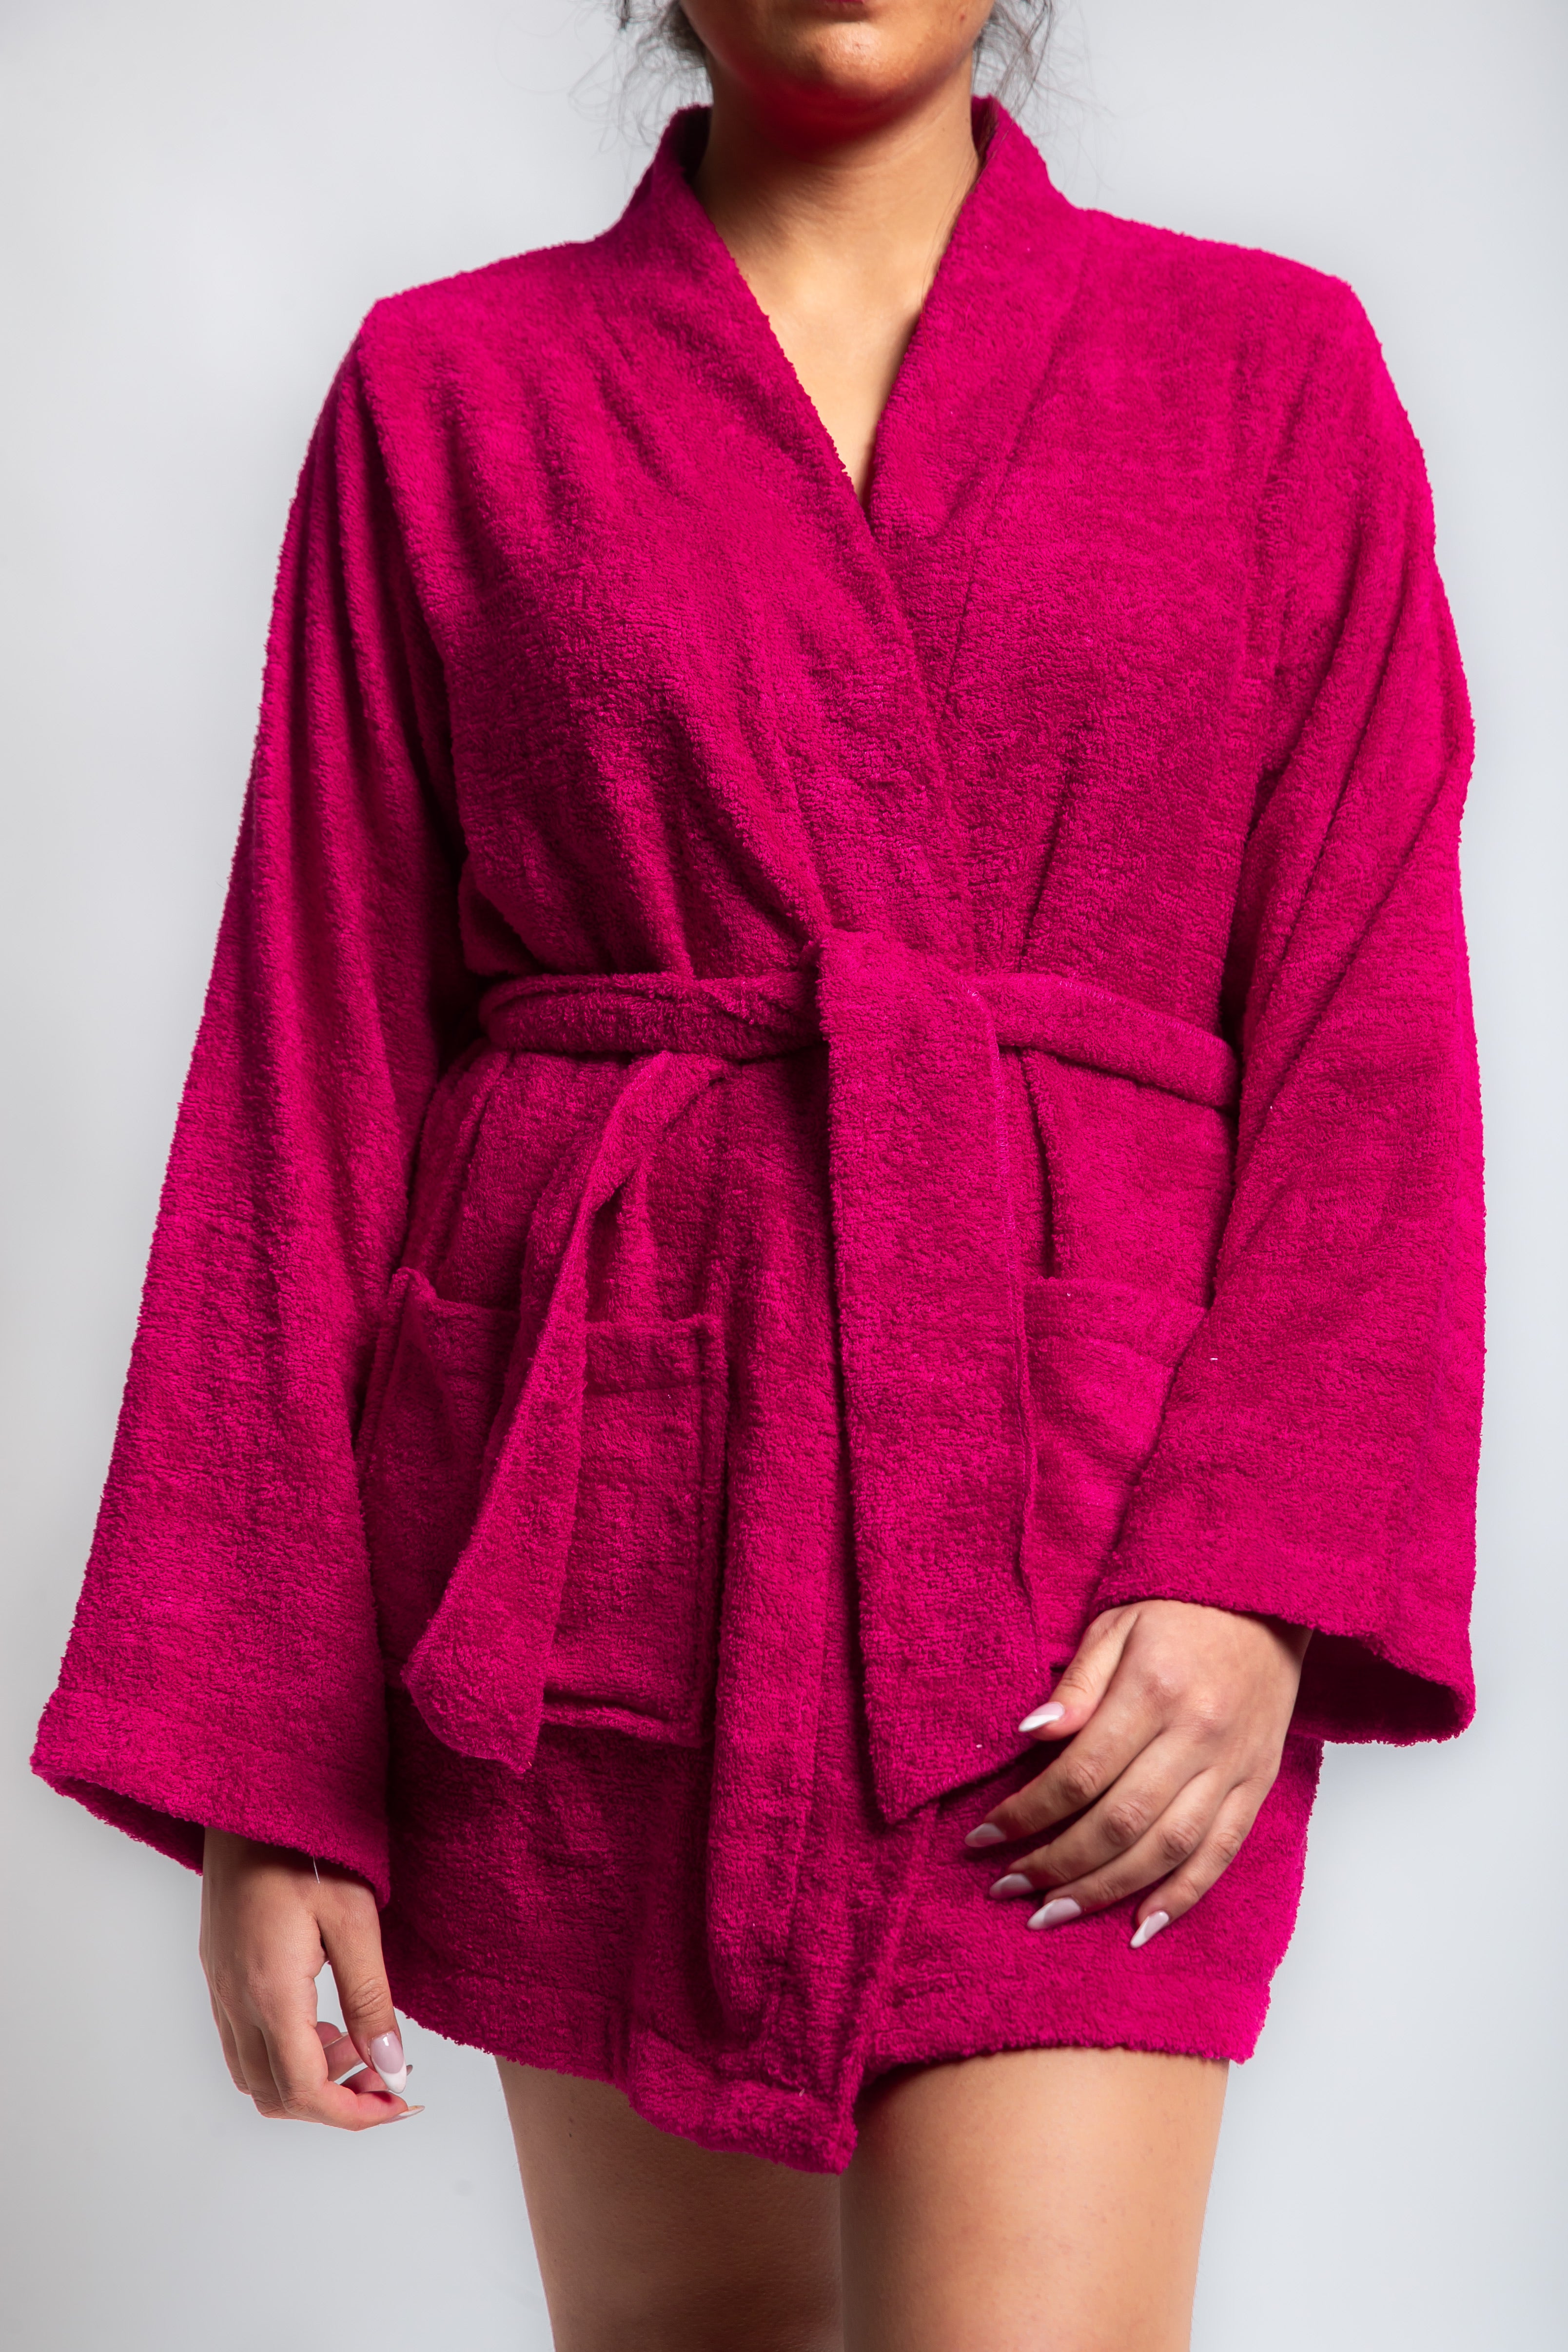 The Morning Robe